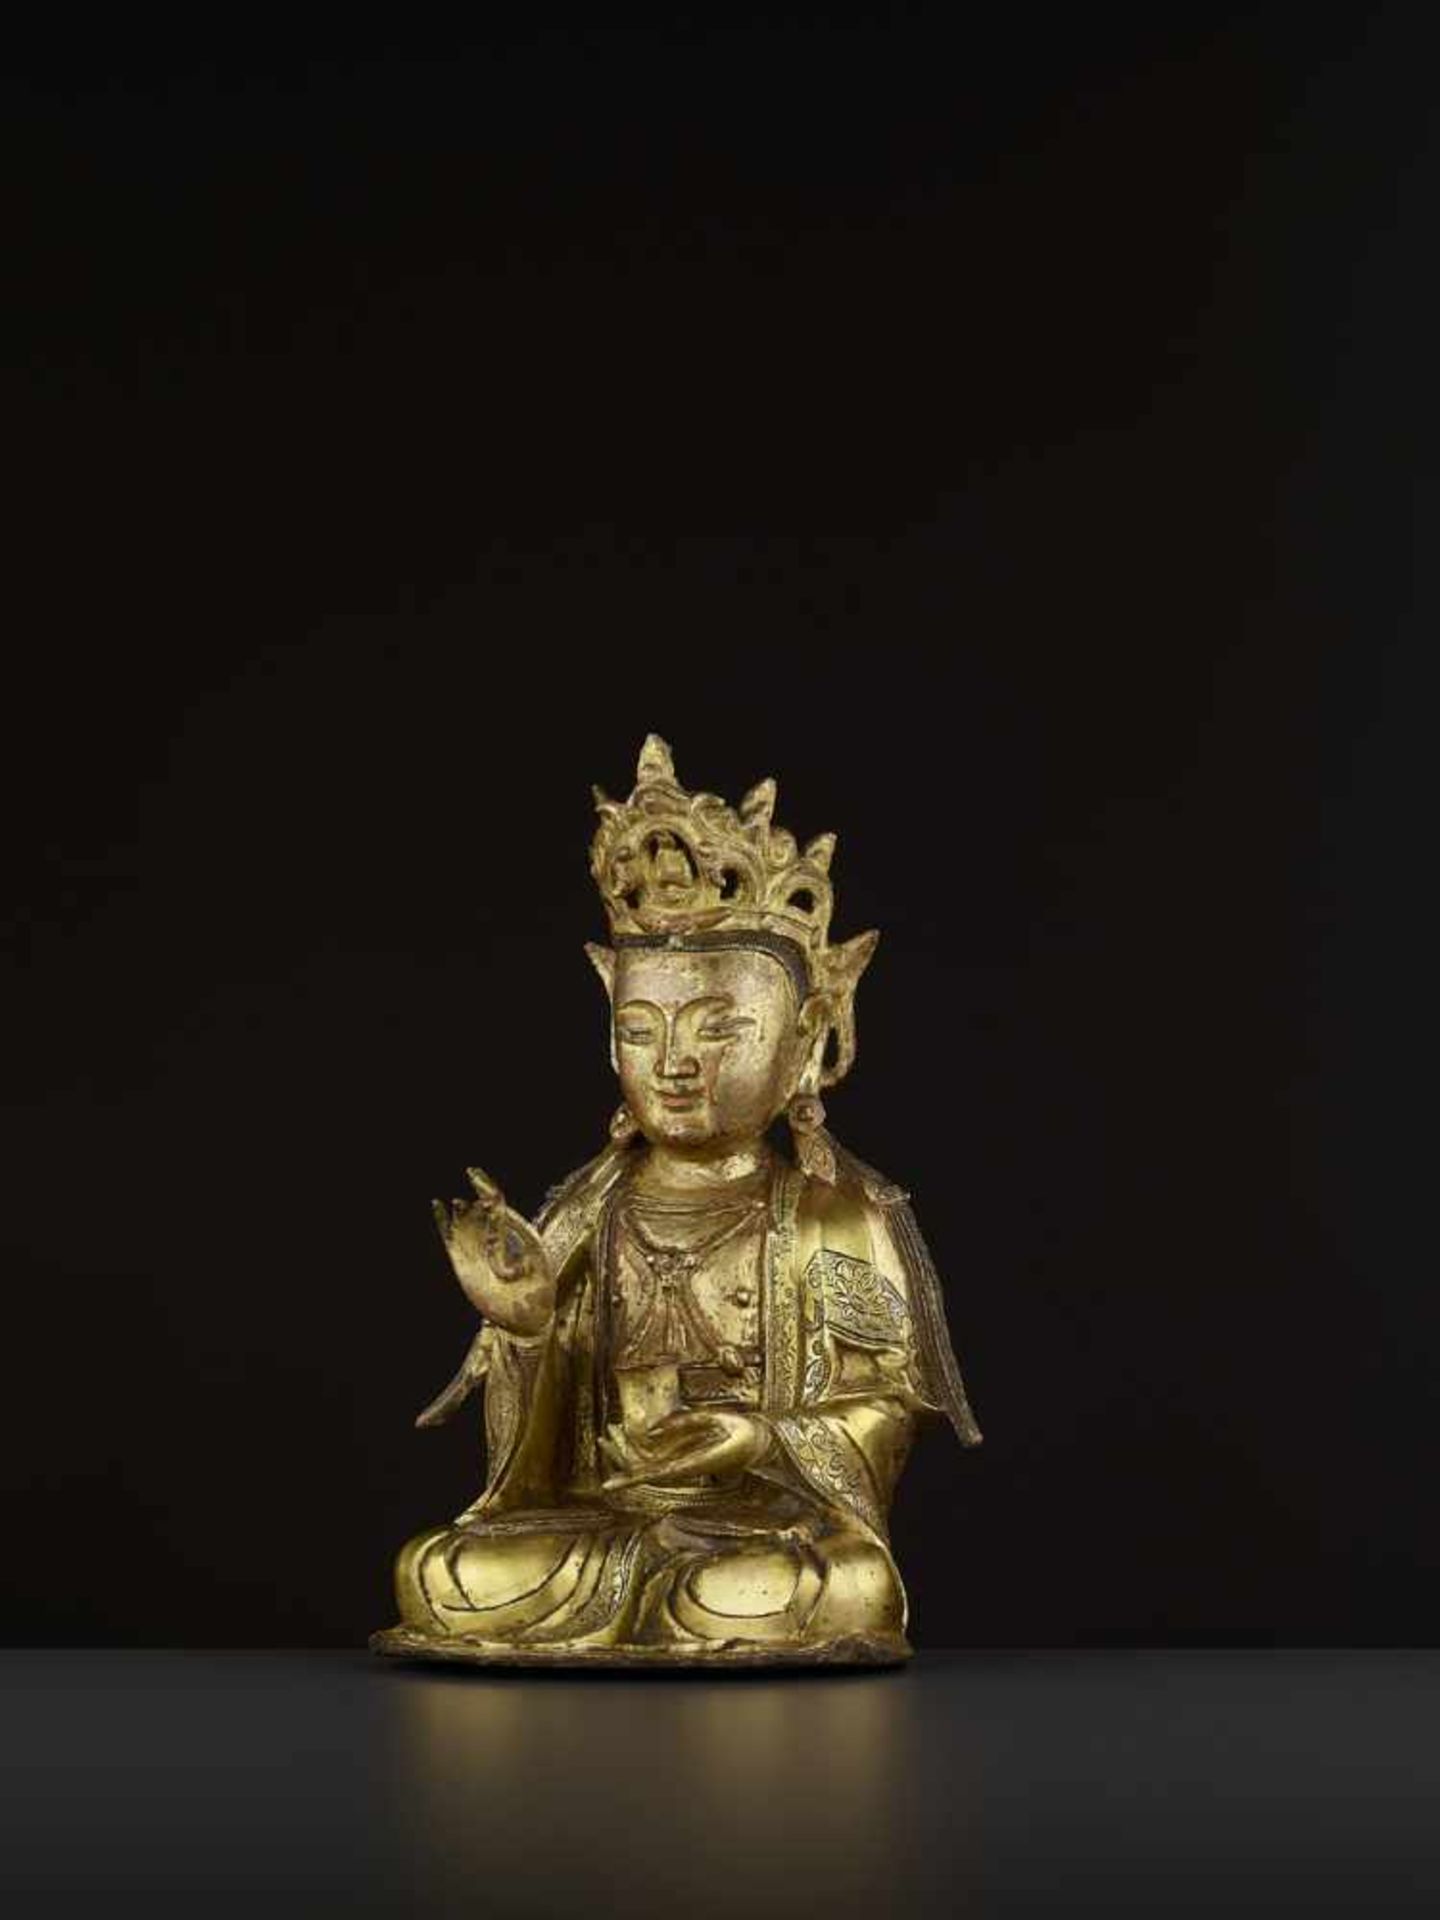 A FINELY CAST GILT-BRONZE FIGURE OF GUANYIN, MING DYNASTY China, 16th-17th century. The figure is